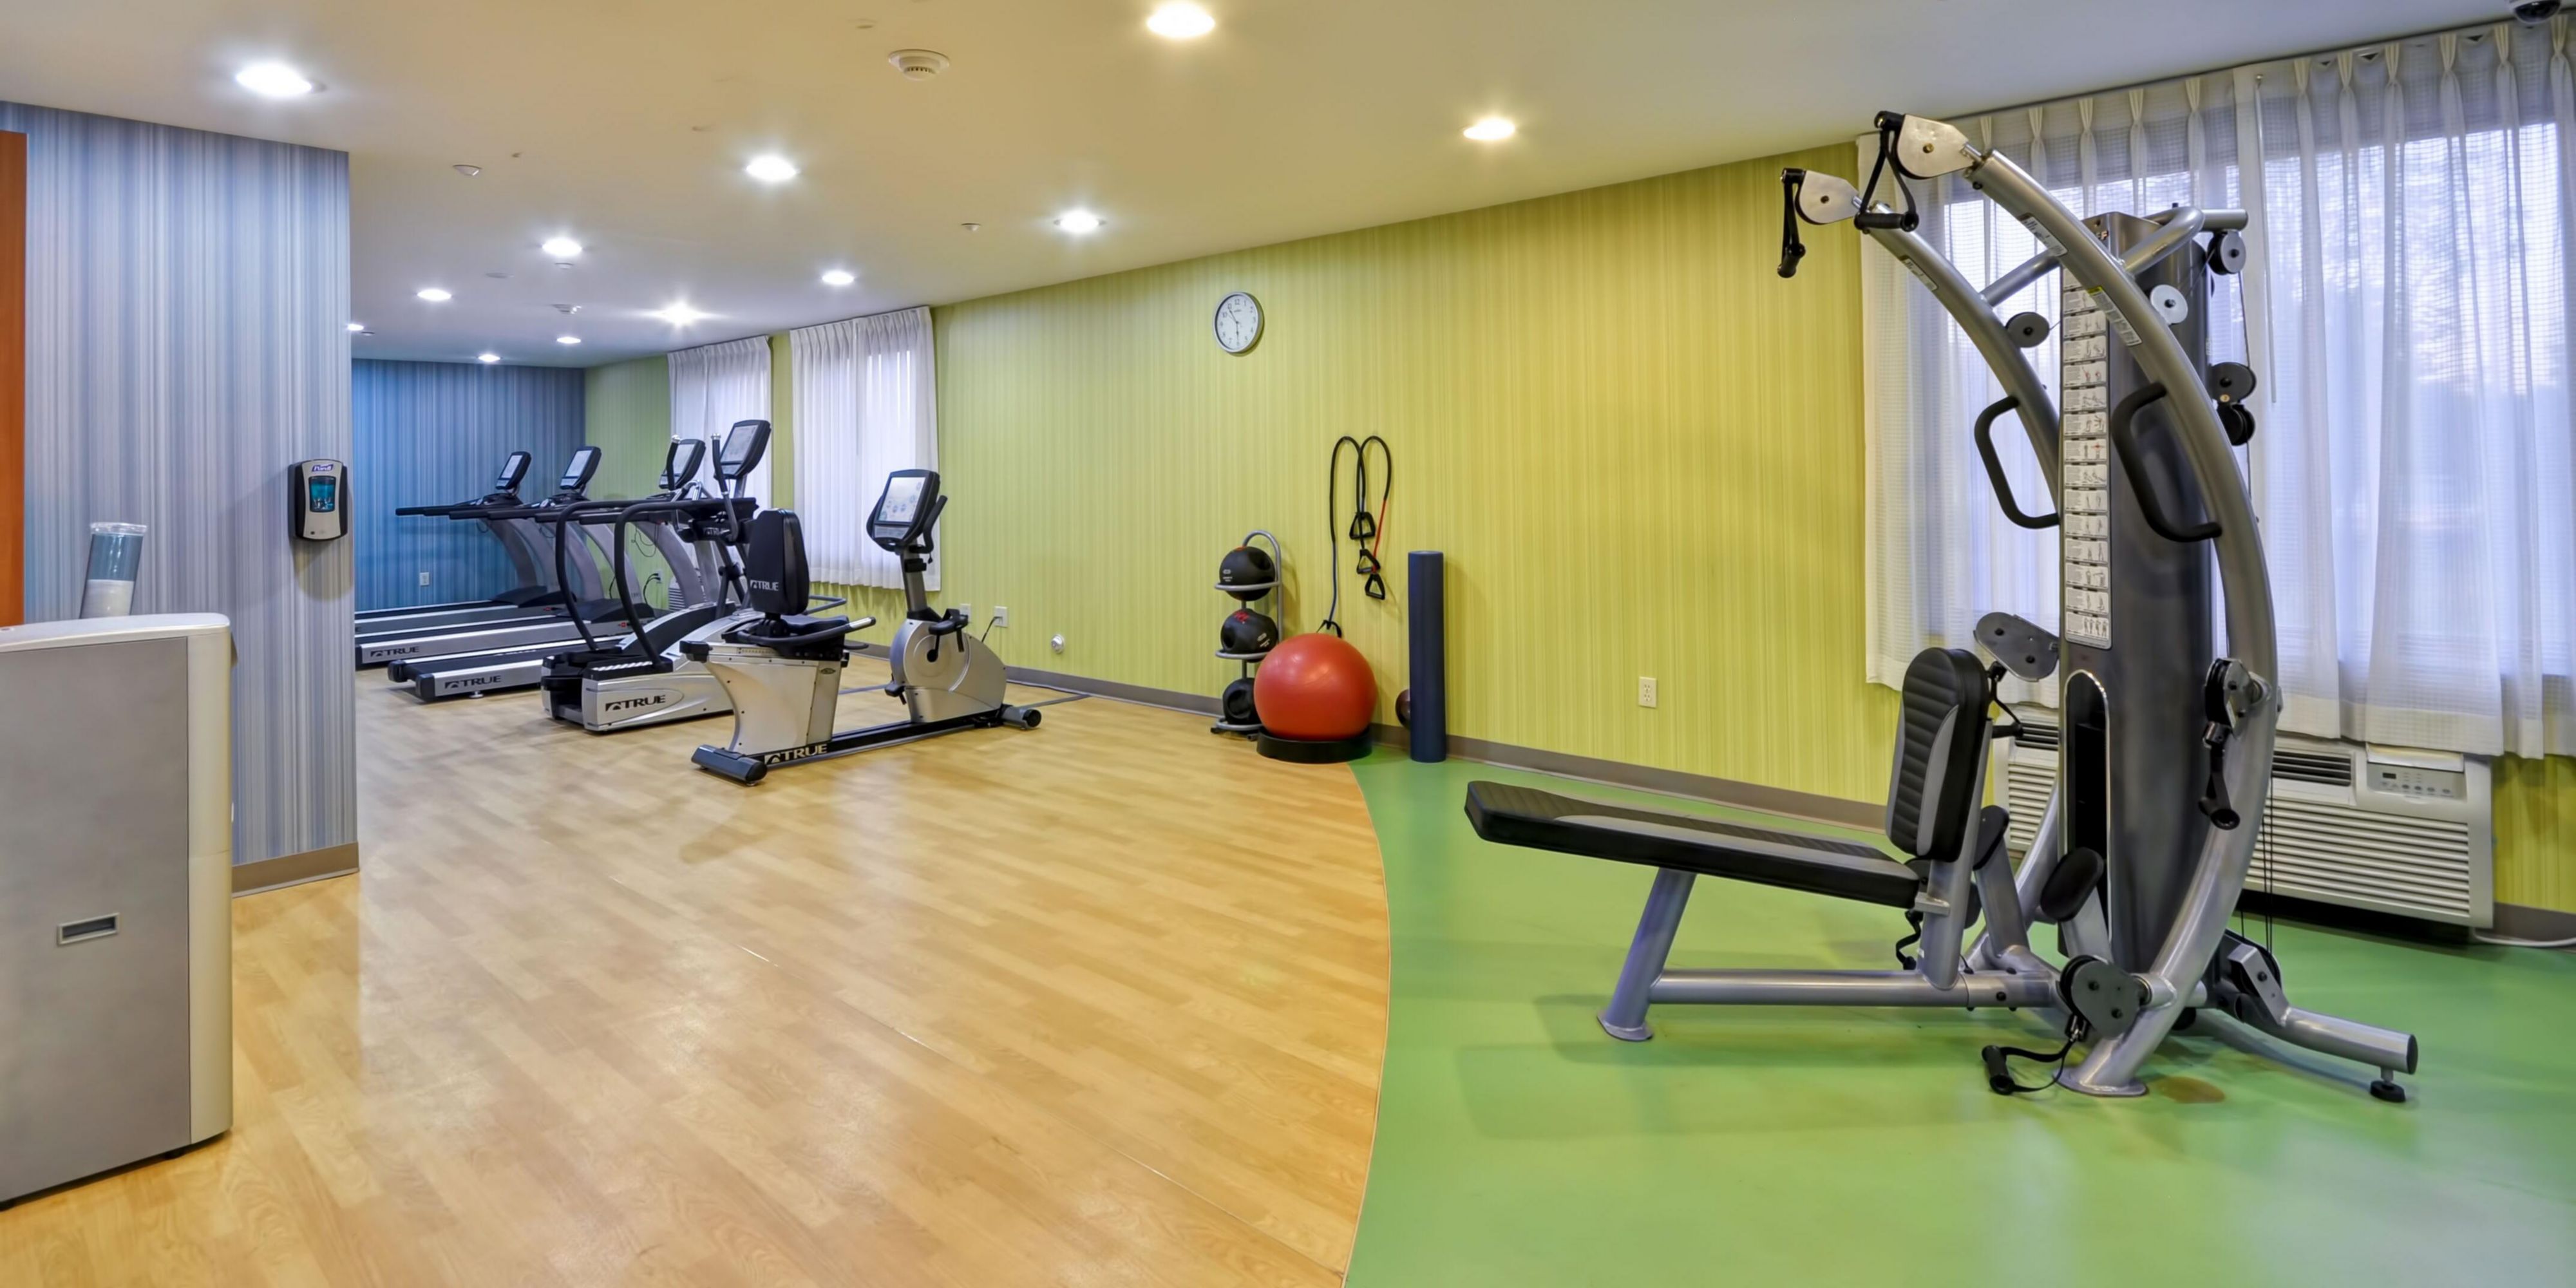 Stay fit and fresh anytime with our 24-hour Fitness Center. Whether you need a long jog on our treadmills or a quick workout with our exercise balls, we’ve got you covered.